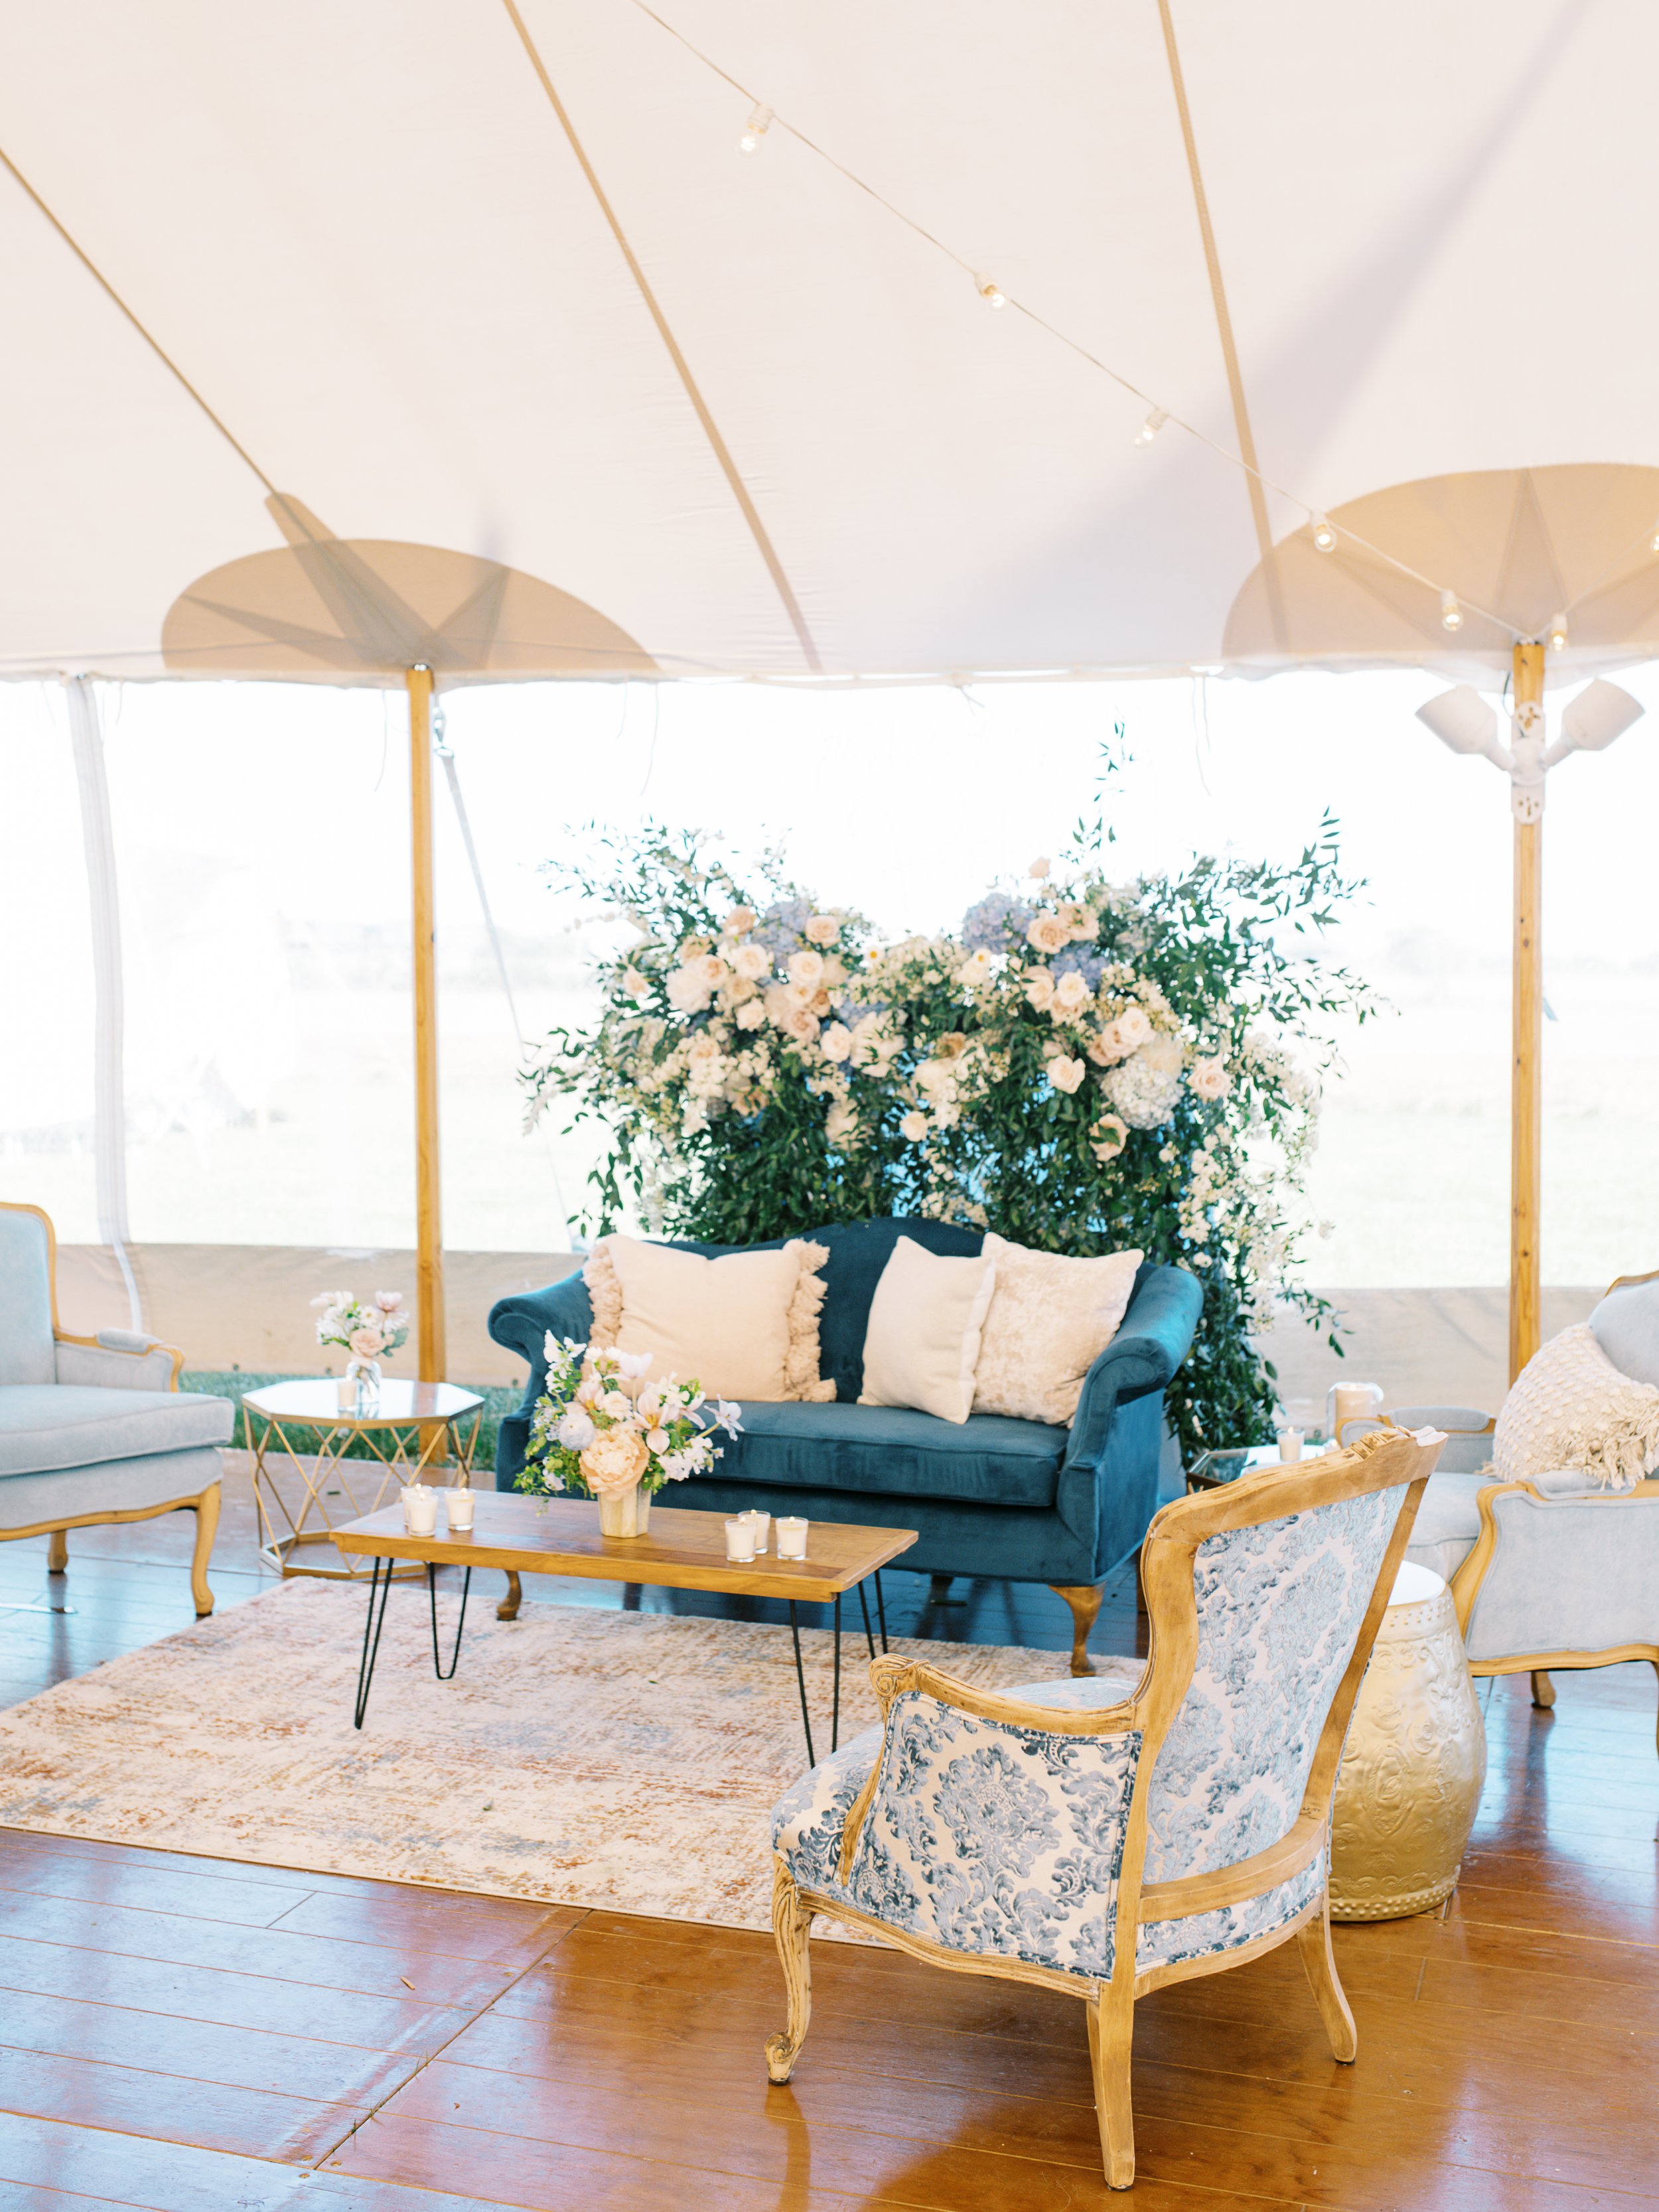 Custom Lounge for Wedding Guests to Enjoy